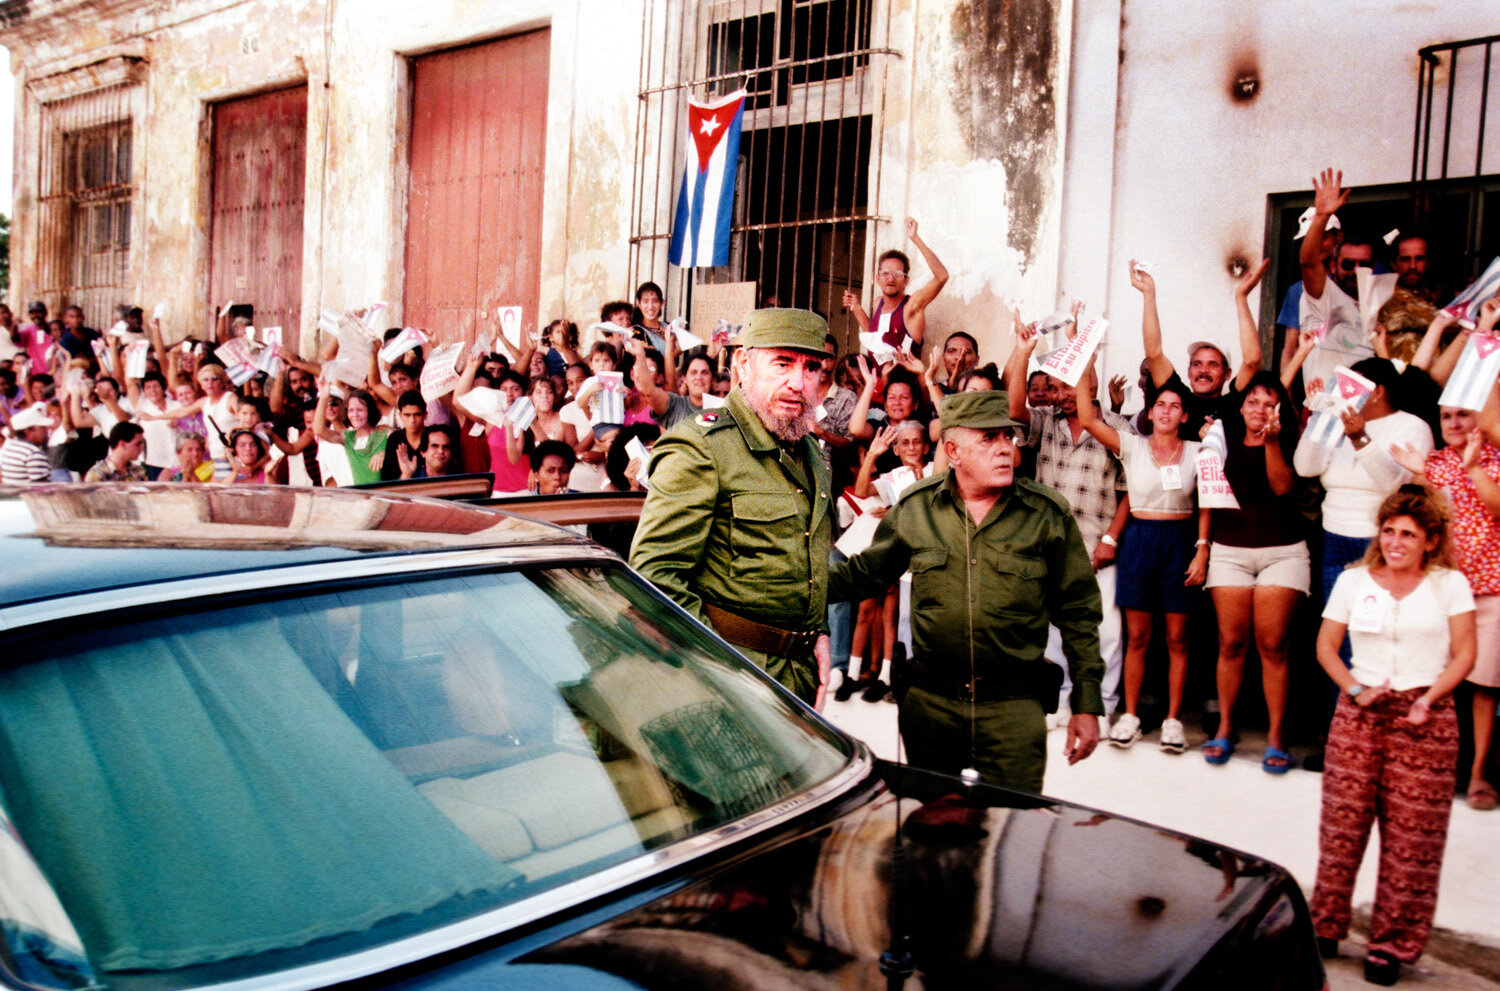  Cuban President Fidel Castro is being welcomed by the crowd as arriving at the shool of  Elian Gonzalez on occasion of his 6th birthday on December 6, 1999, in Cardenas, Cuba. Castro said on saturday night that if the boy is not back in Cuba within 